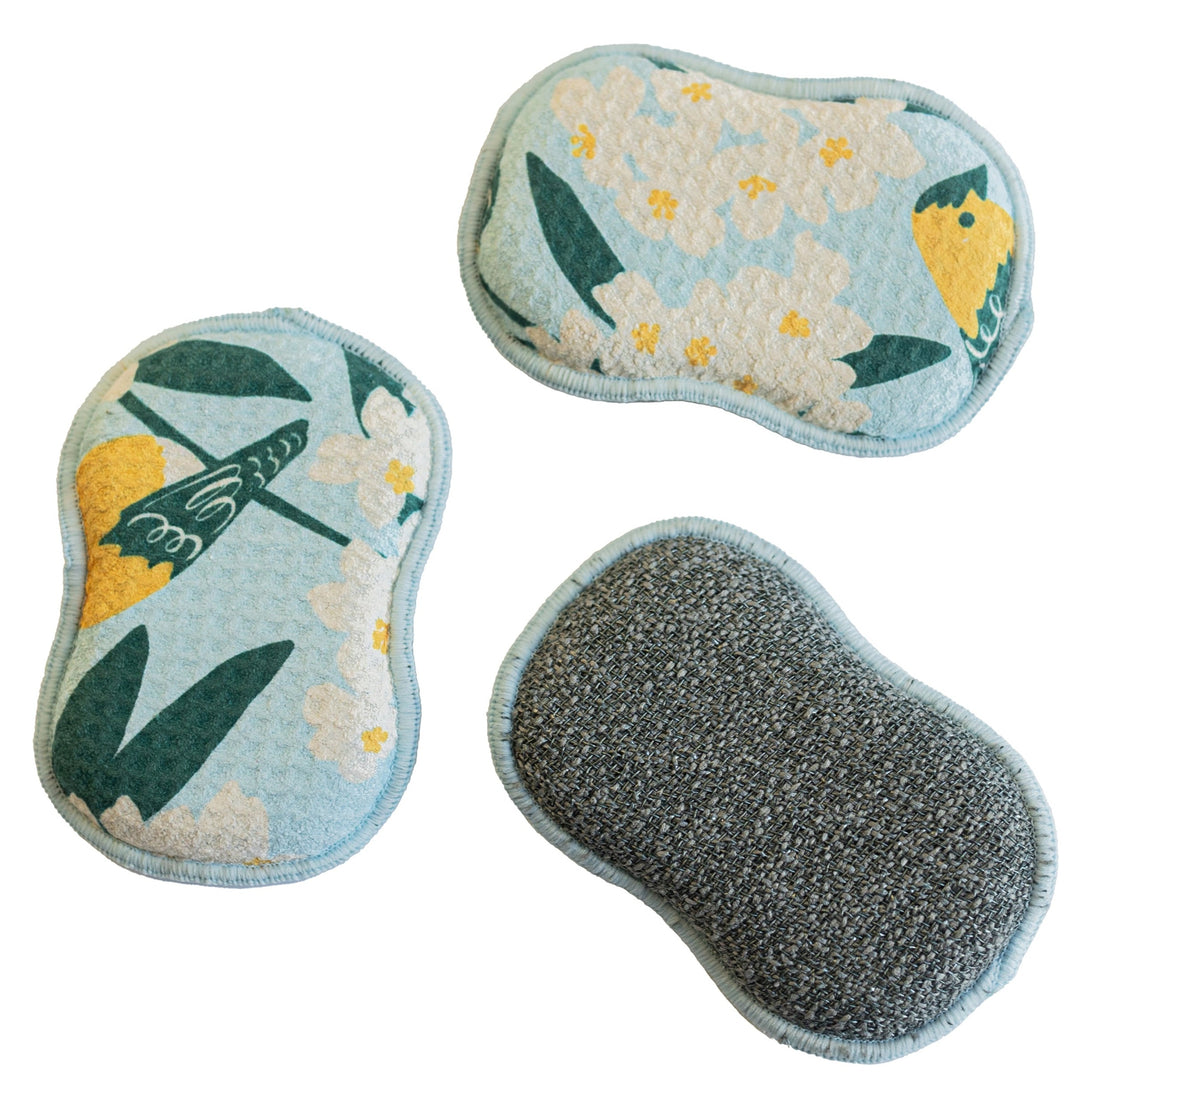 RE:usable Sponges (Set of 3) - Nuthatch Birdsong Sponges &amp; Scouring Pads Once Again Home Co.   